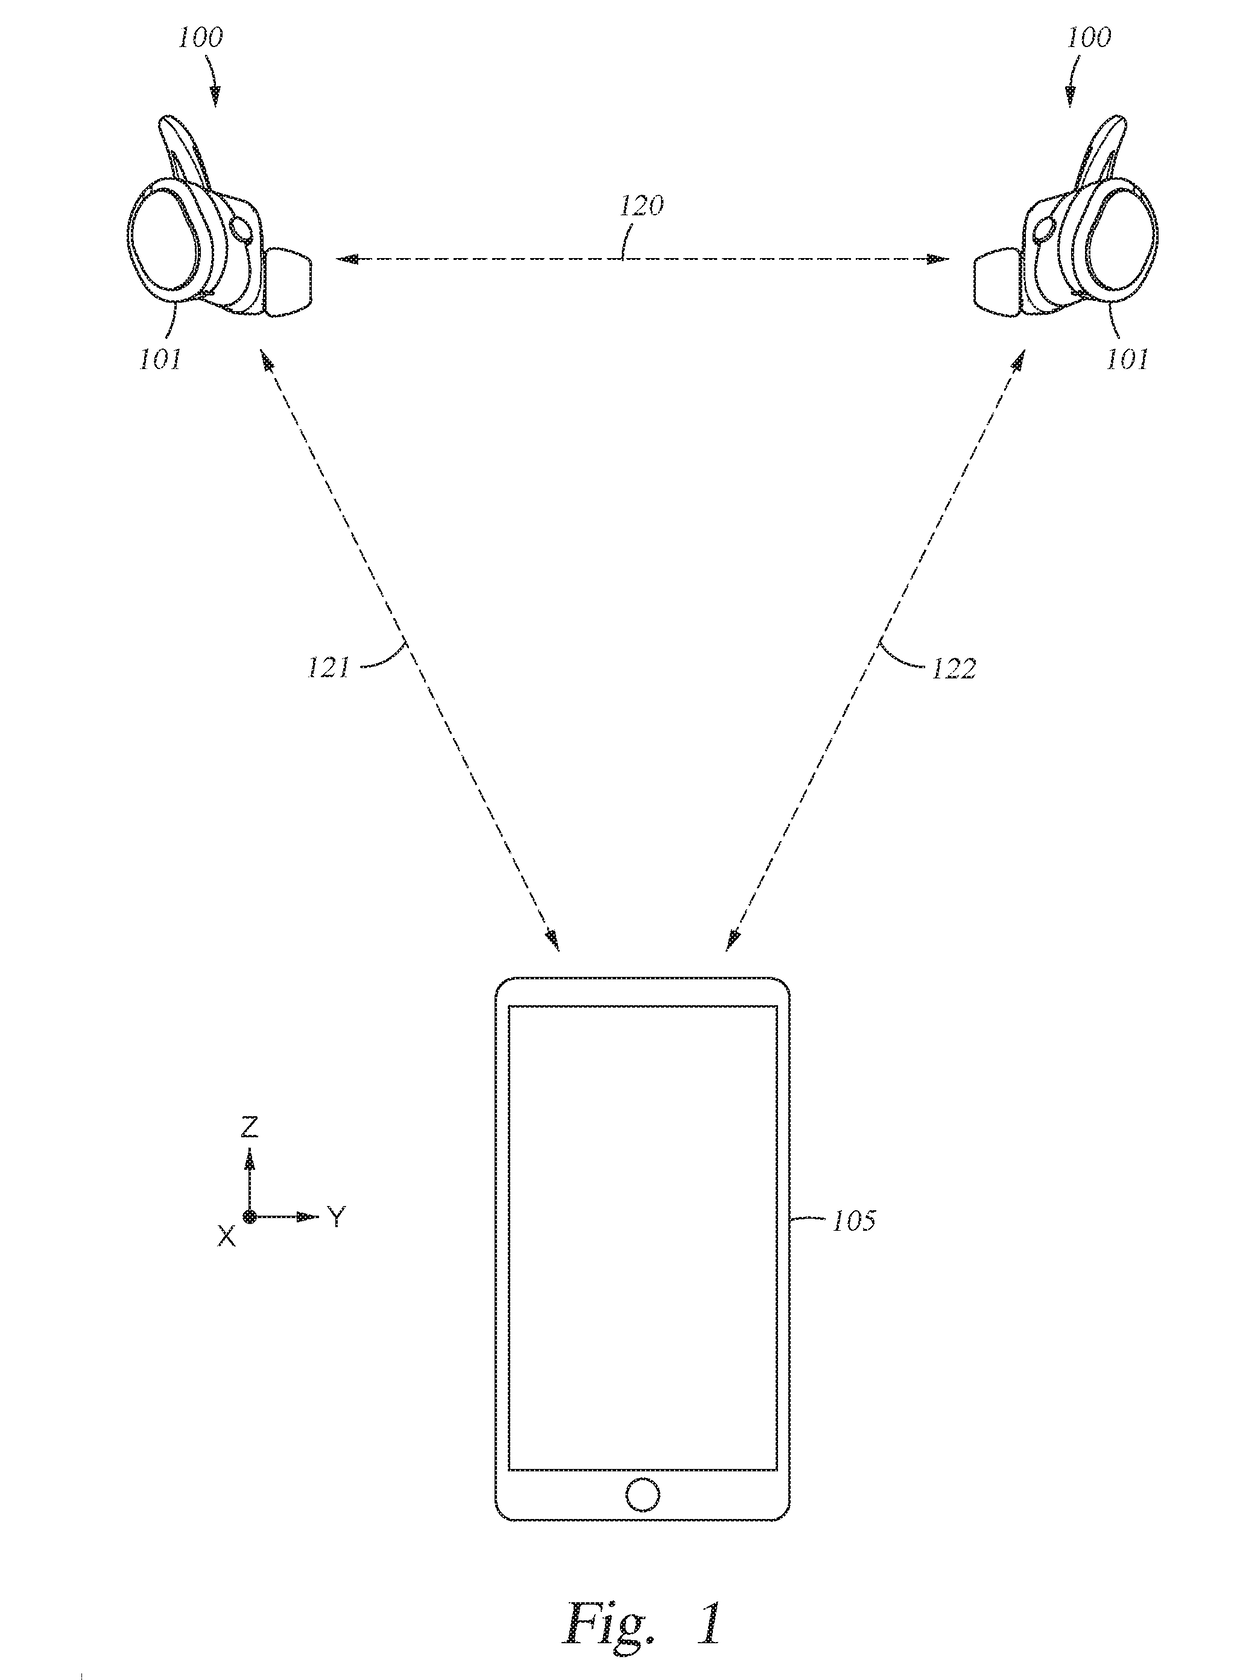 Wireless wearable electronic device communicatively coupled to a remote device